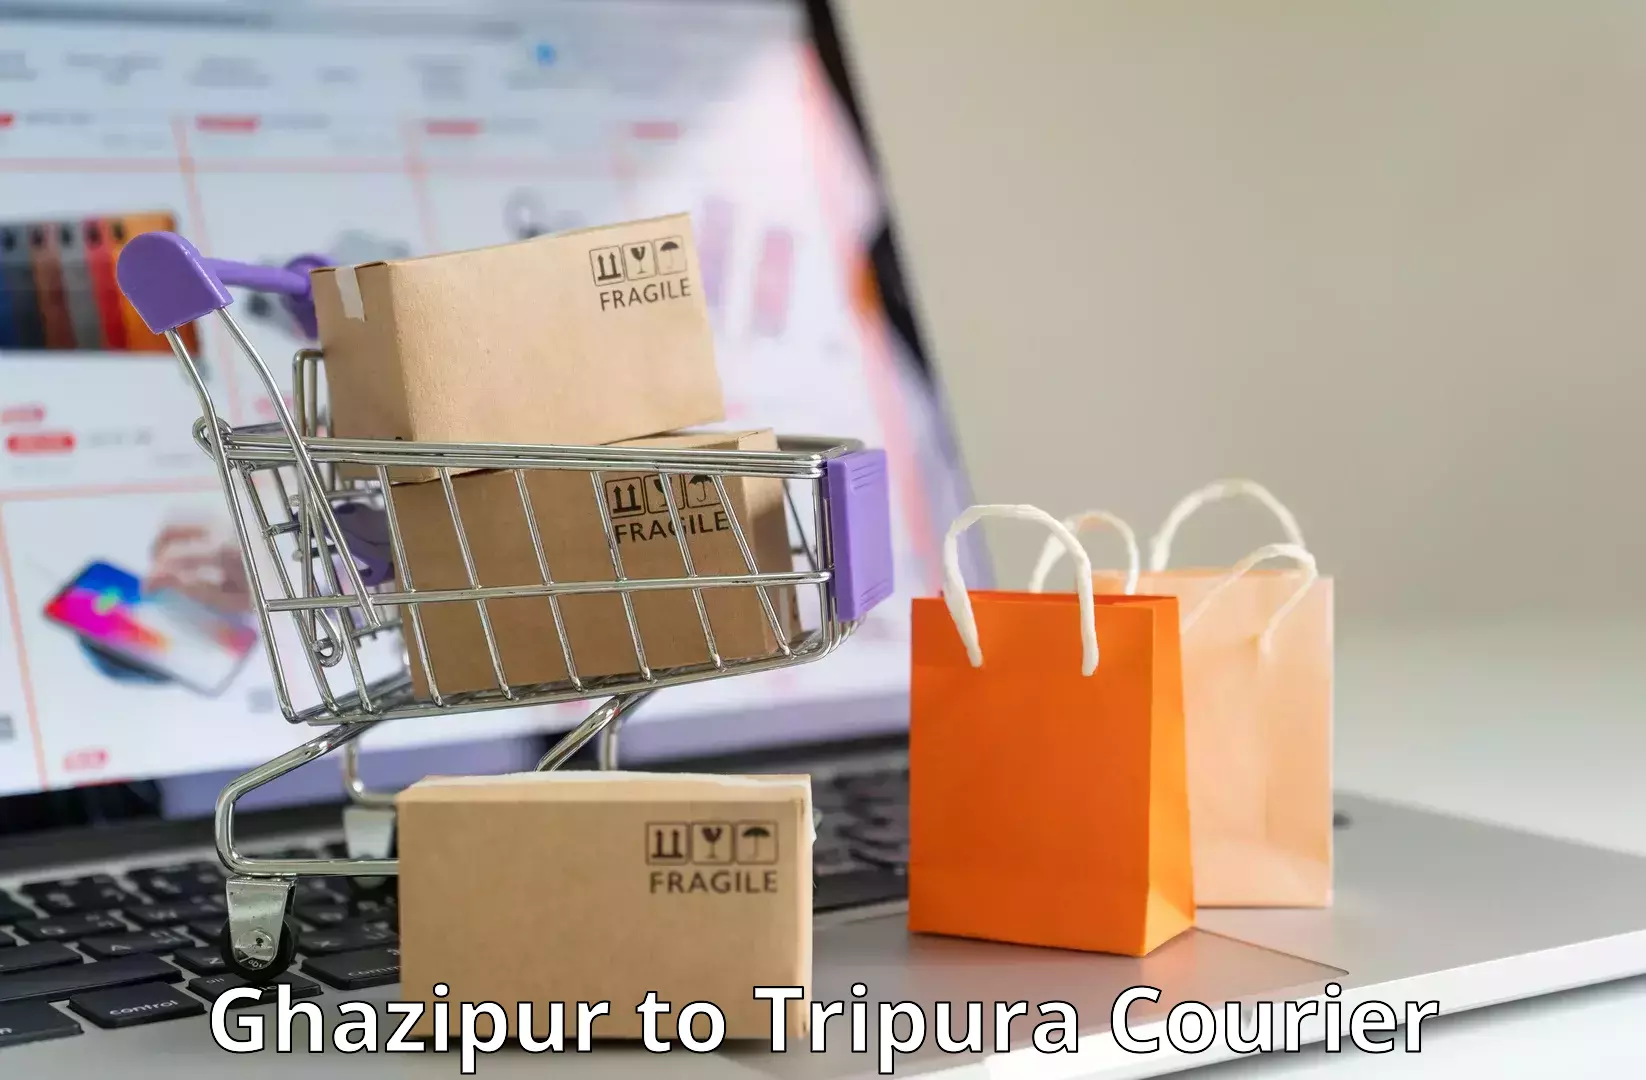 Automated shipping processes Ghazipur to Udaipur Tripura